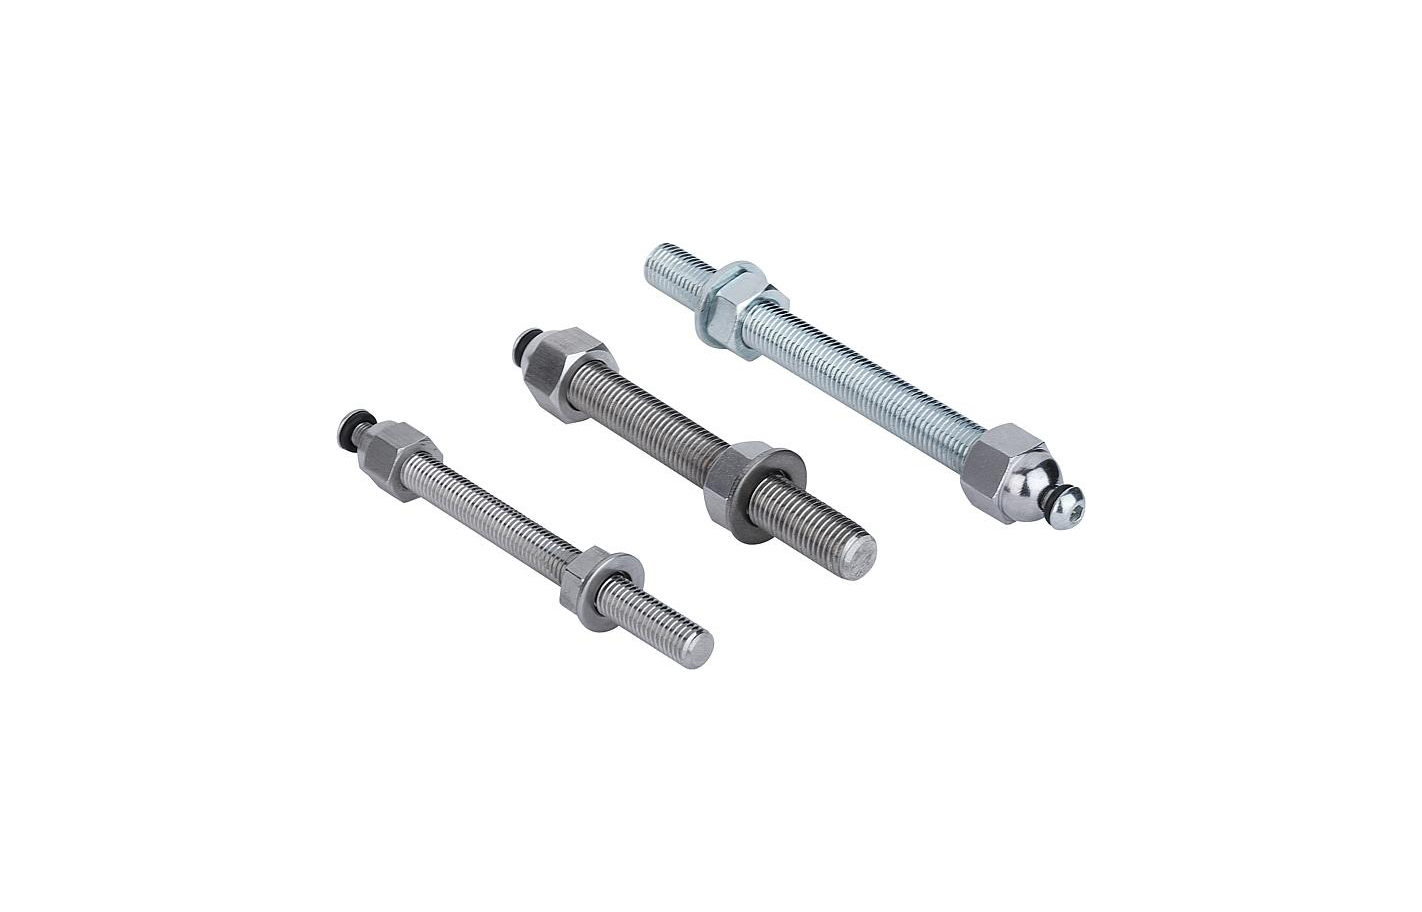 K0669 Levelling feet threaded spindles steel or stainless steel